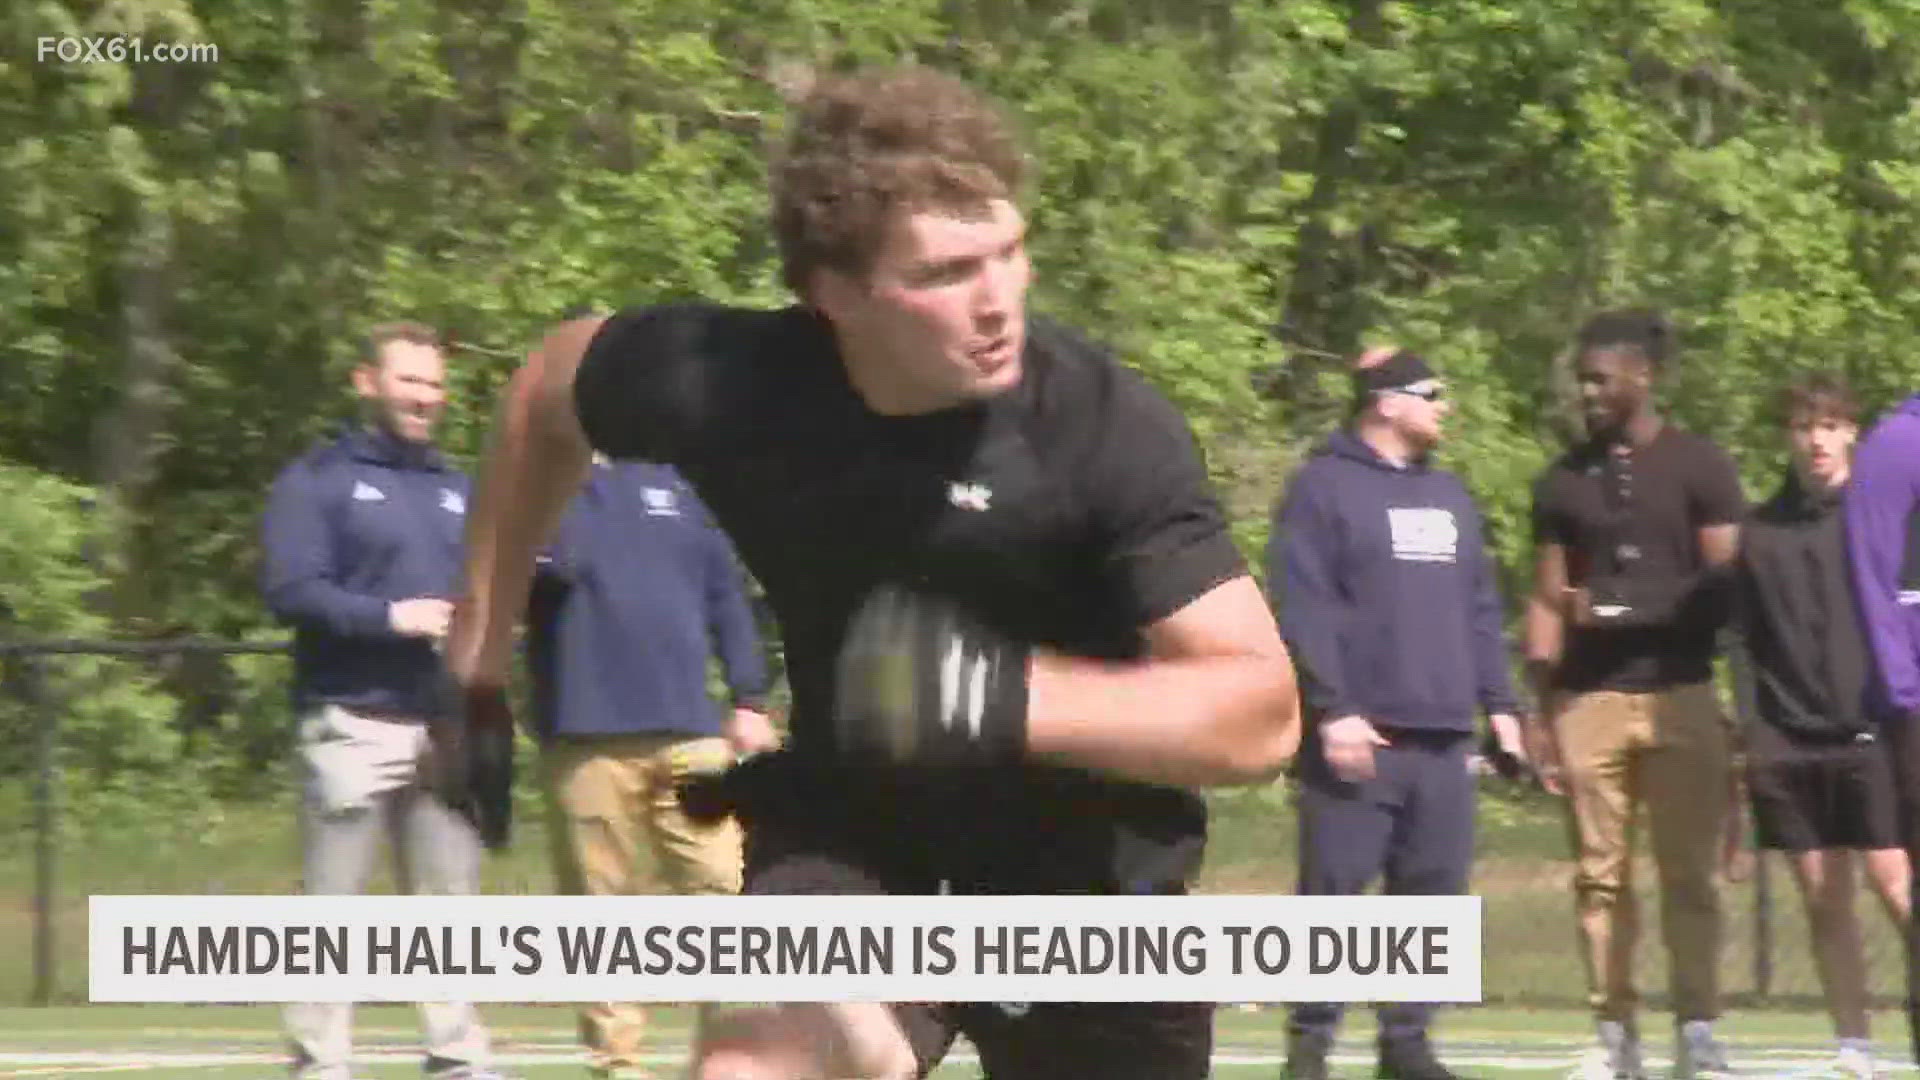 In April, the linebacker committed to continue his playing career at Duke.